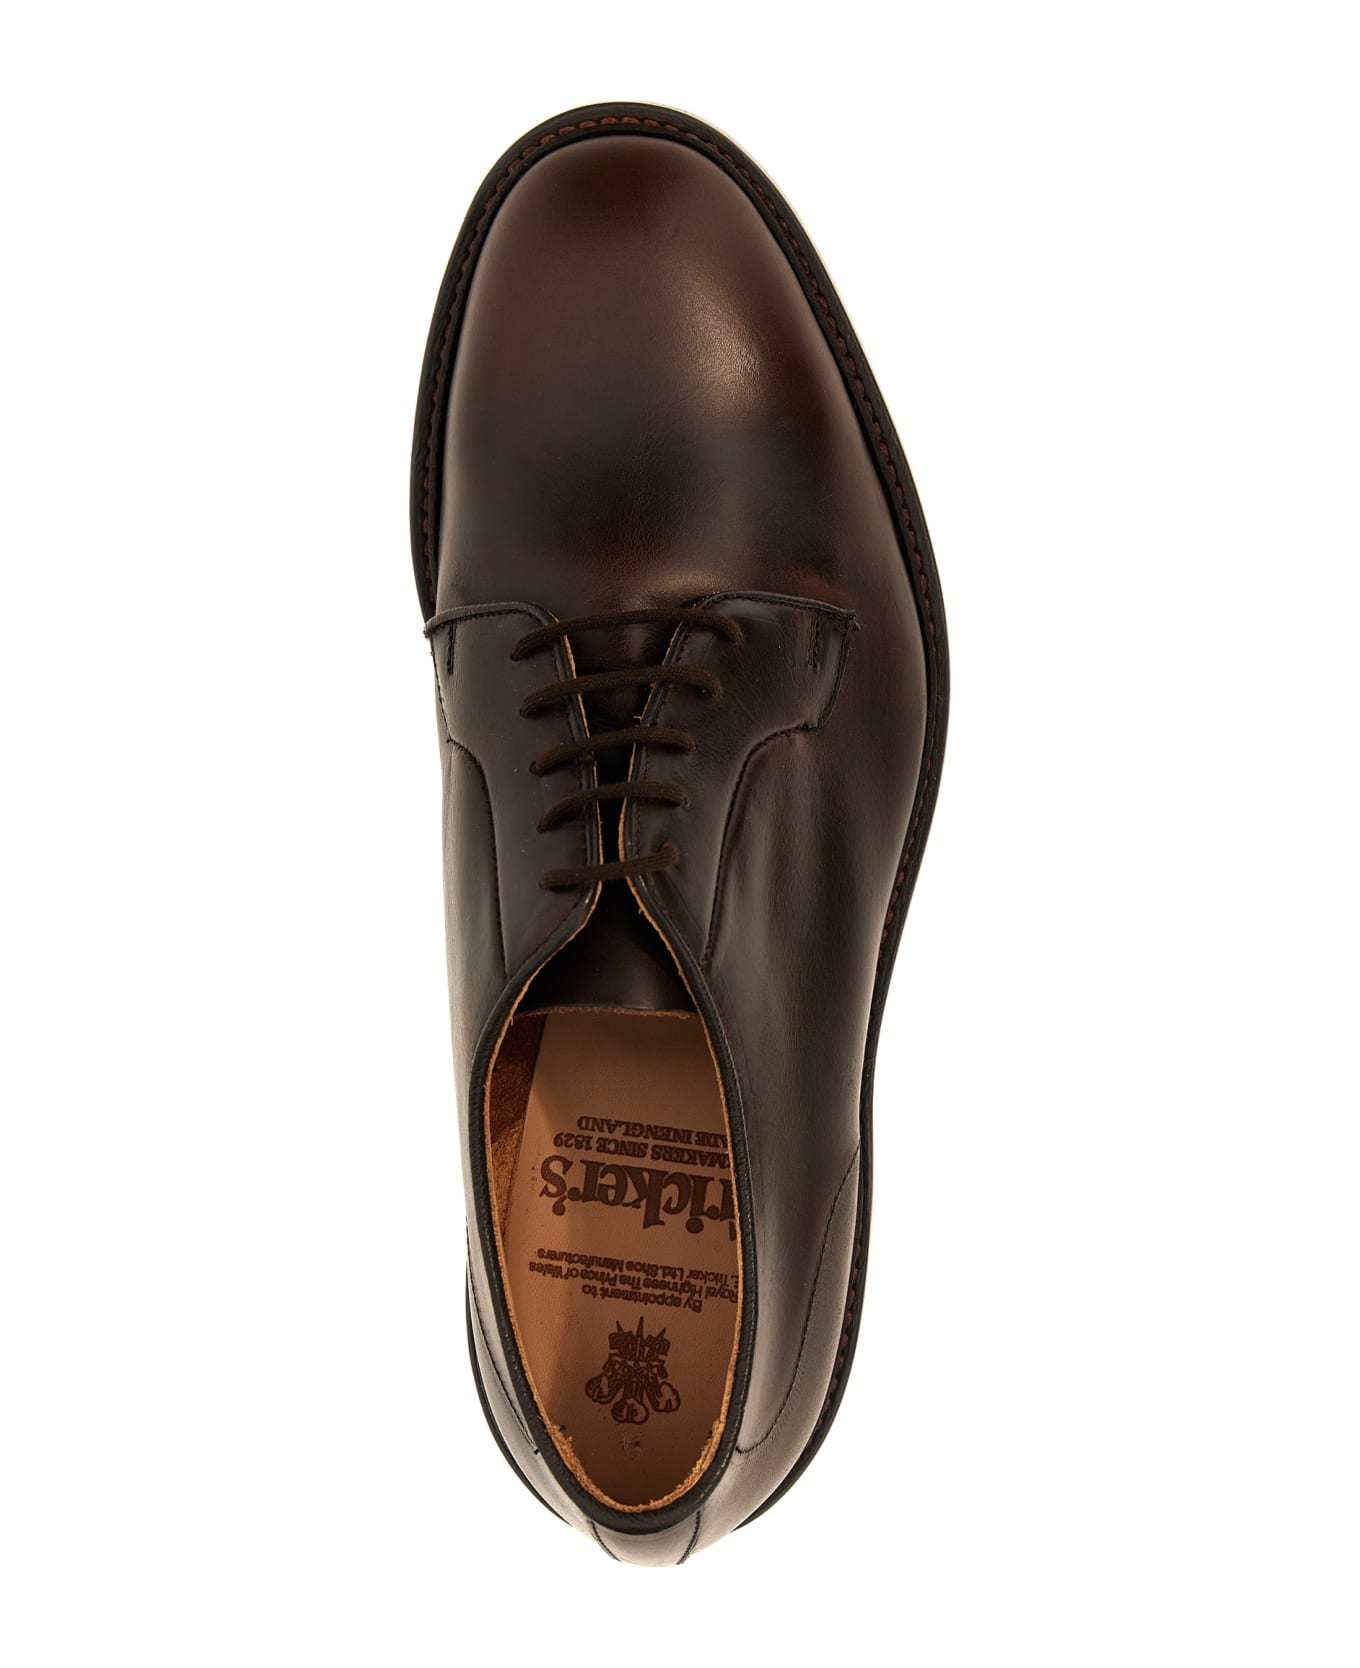 Tricker's 'robert' Lace Up Shoes - Brown ローファー＆デッキシューズ